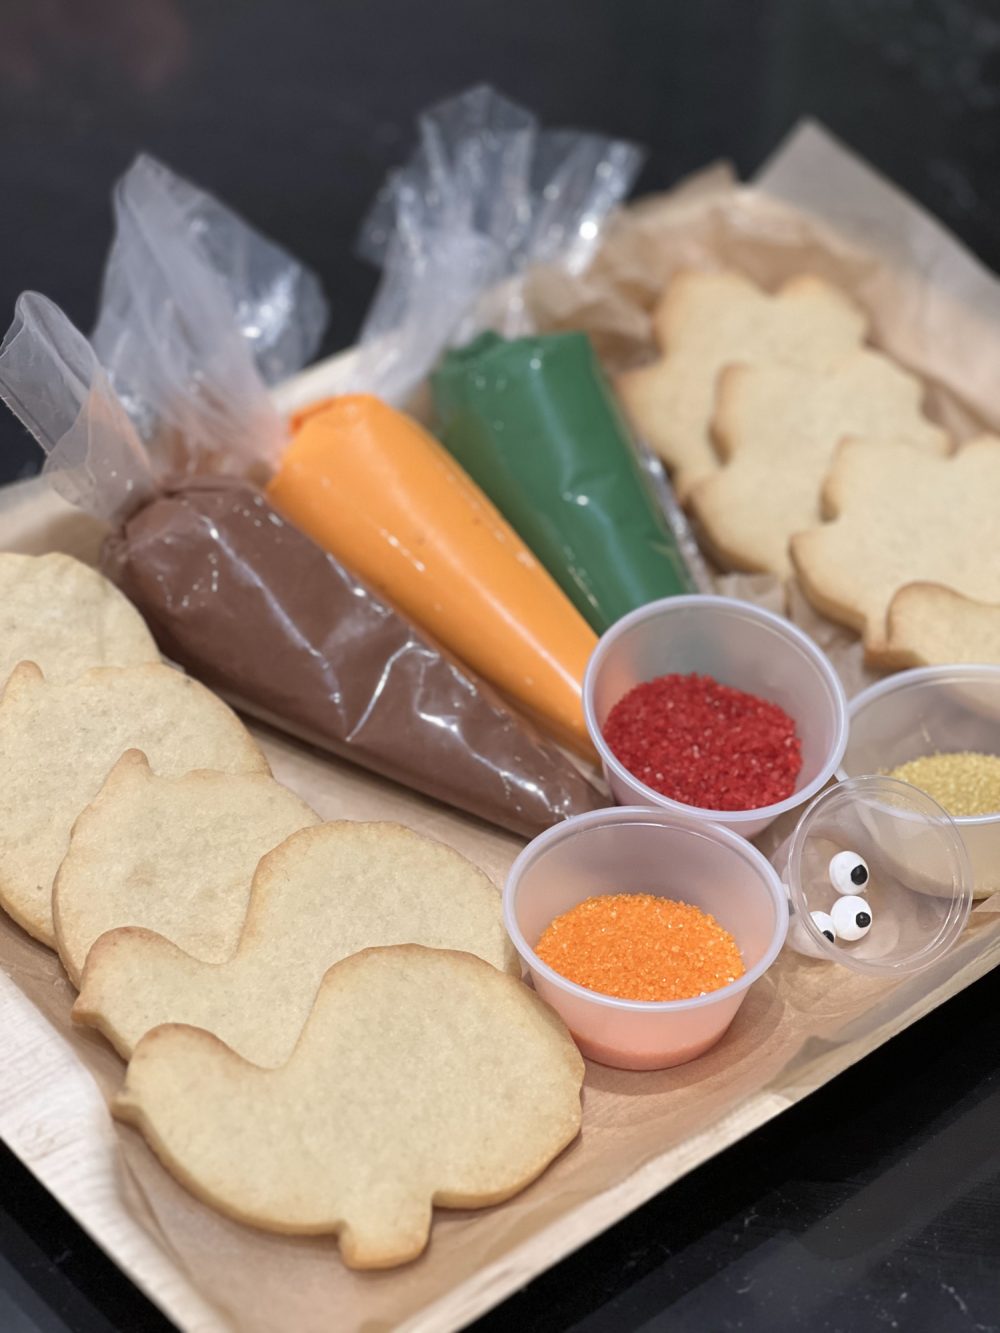 Verzênay Chicago offers a beautiful holiday cookie decorating kit for $17. Photo credit Verzênay 